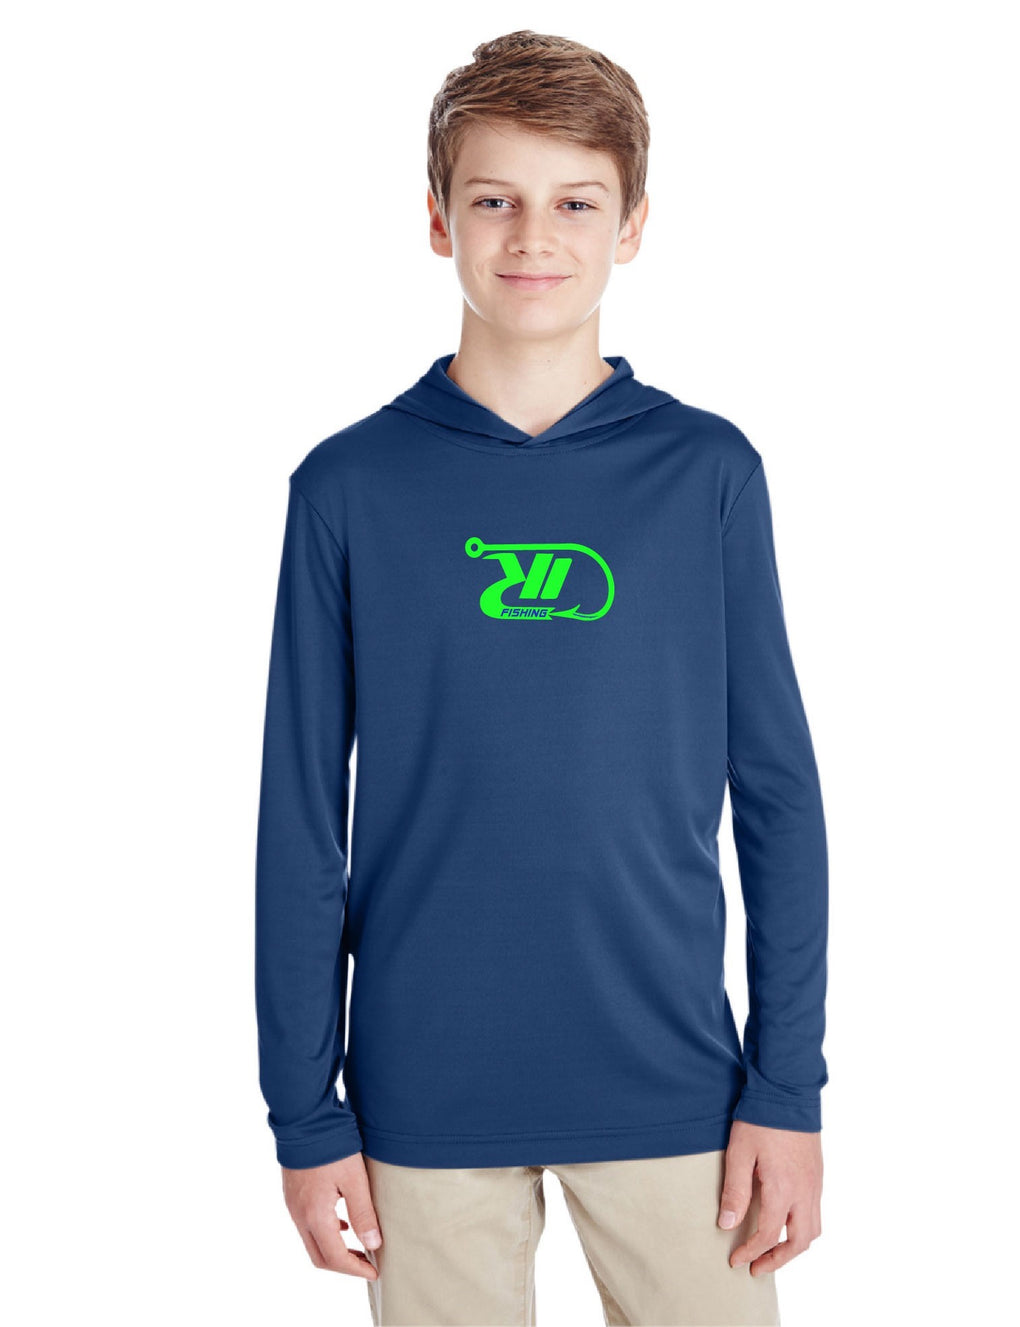 Youth Bad To The Bone Performance Hoodie - Navy | Lime